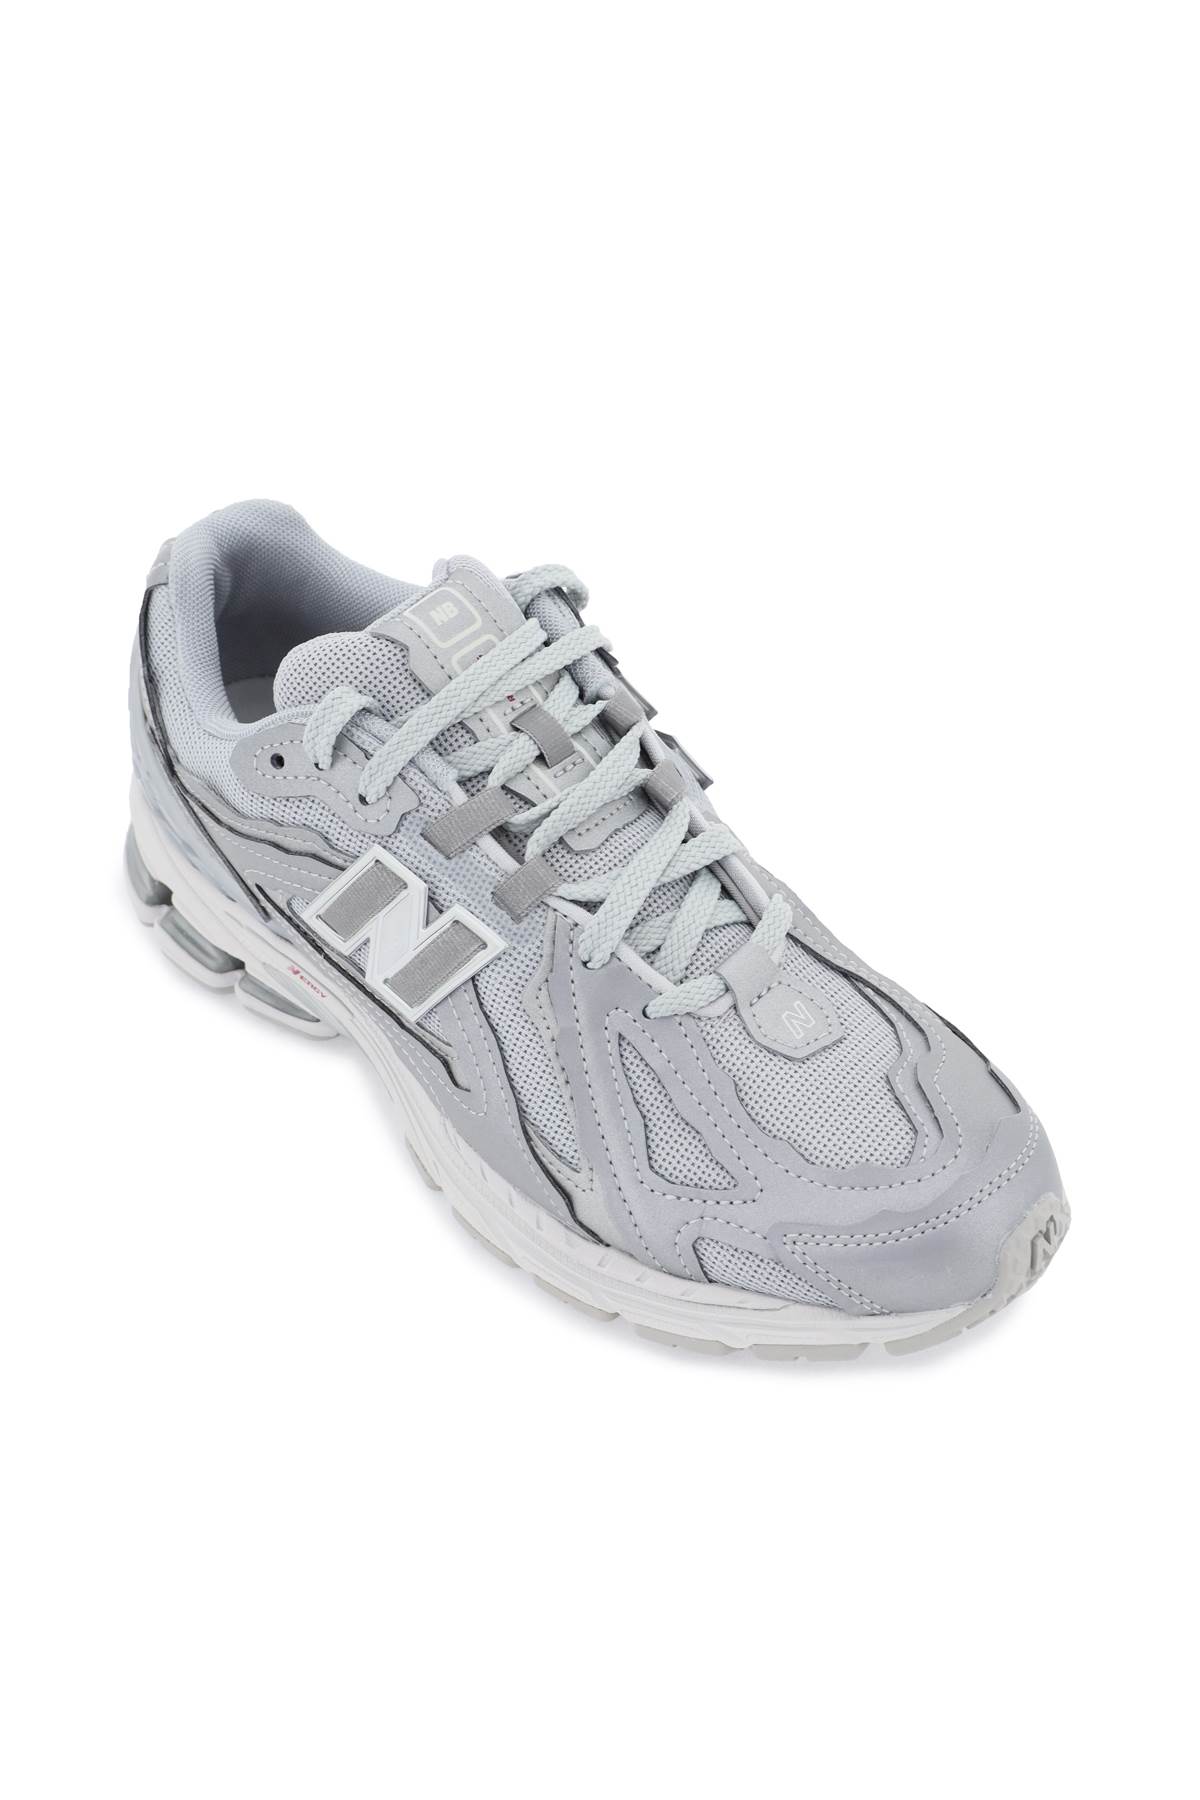 Shop New Balance 1906dh Sneakers In Silver Metallic (silver)